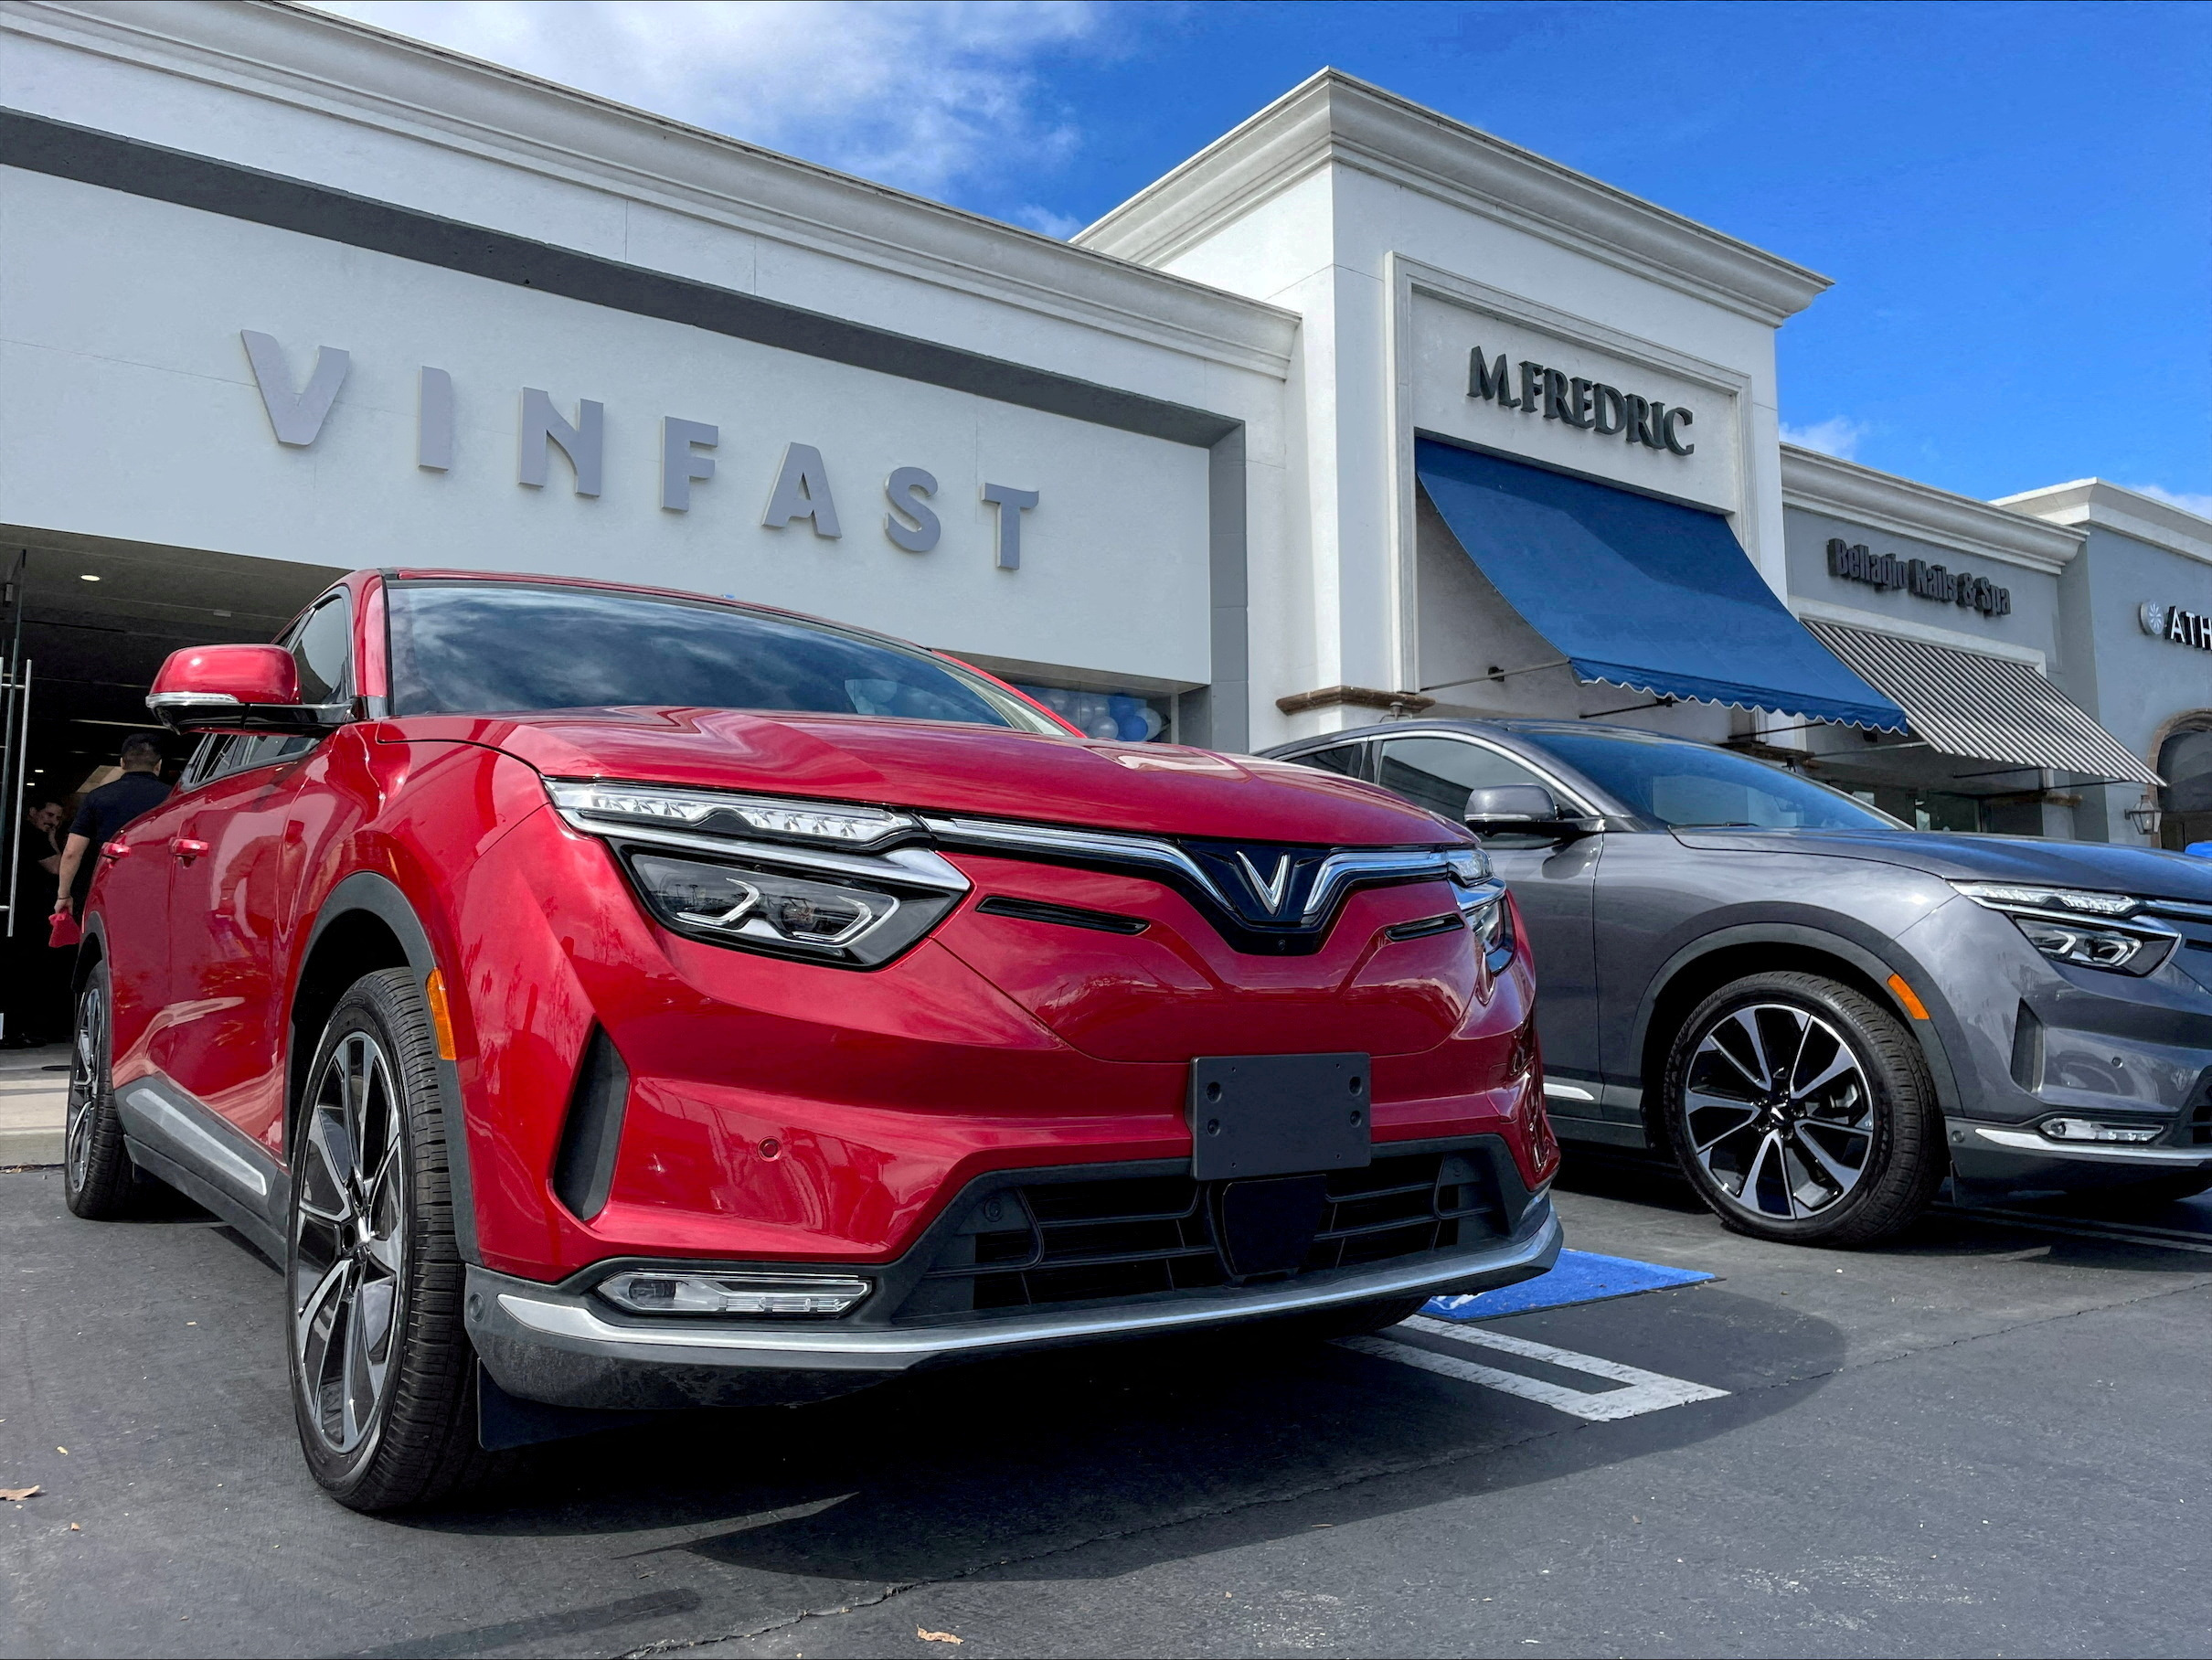 VinFast electric vehicles are parked at a store in Los Angeles, U.S.